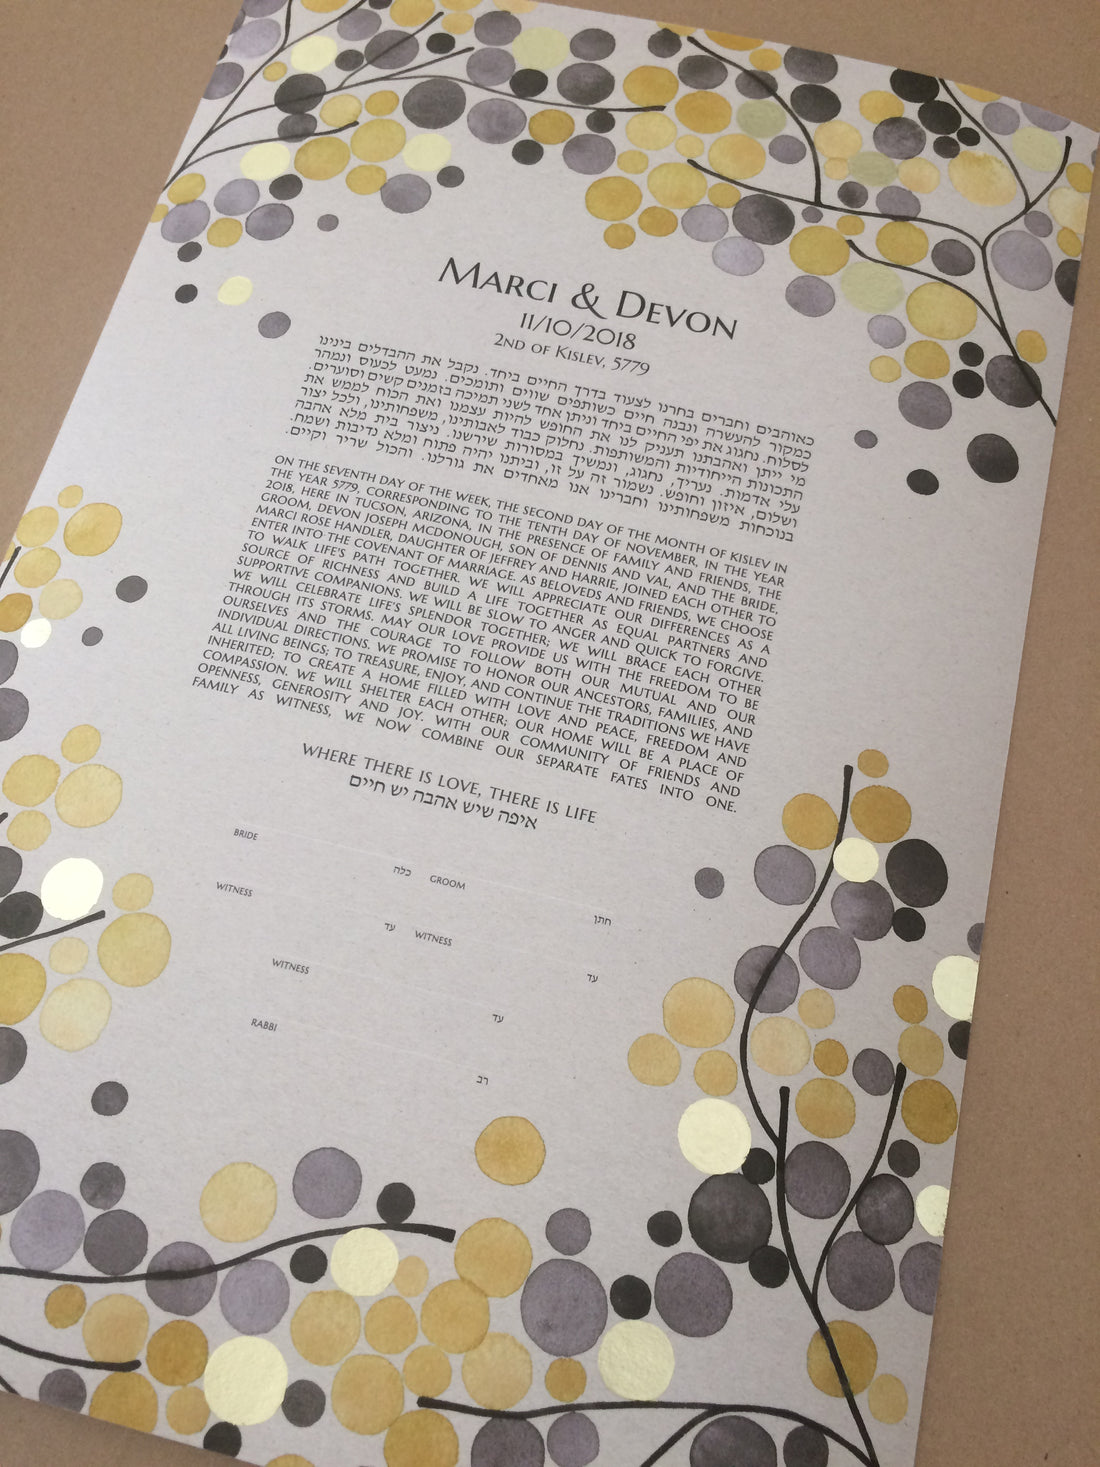 Giclee printed ketubah with gold leaf applied